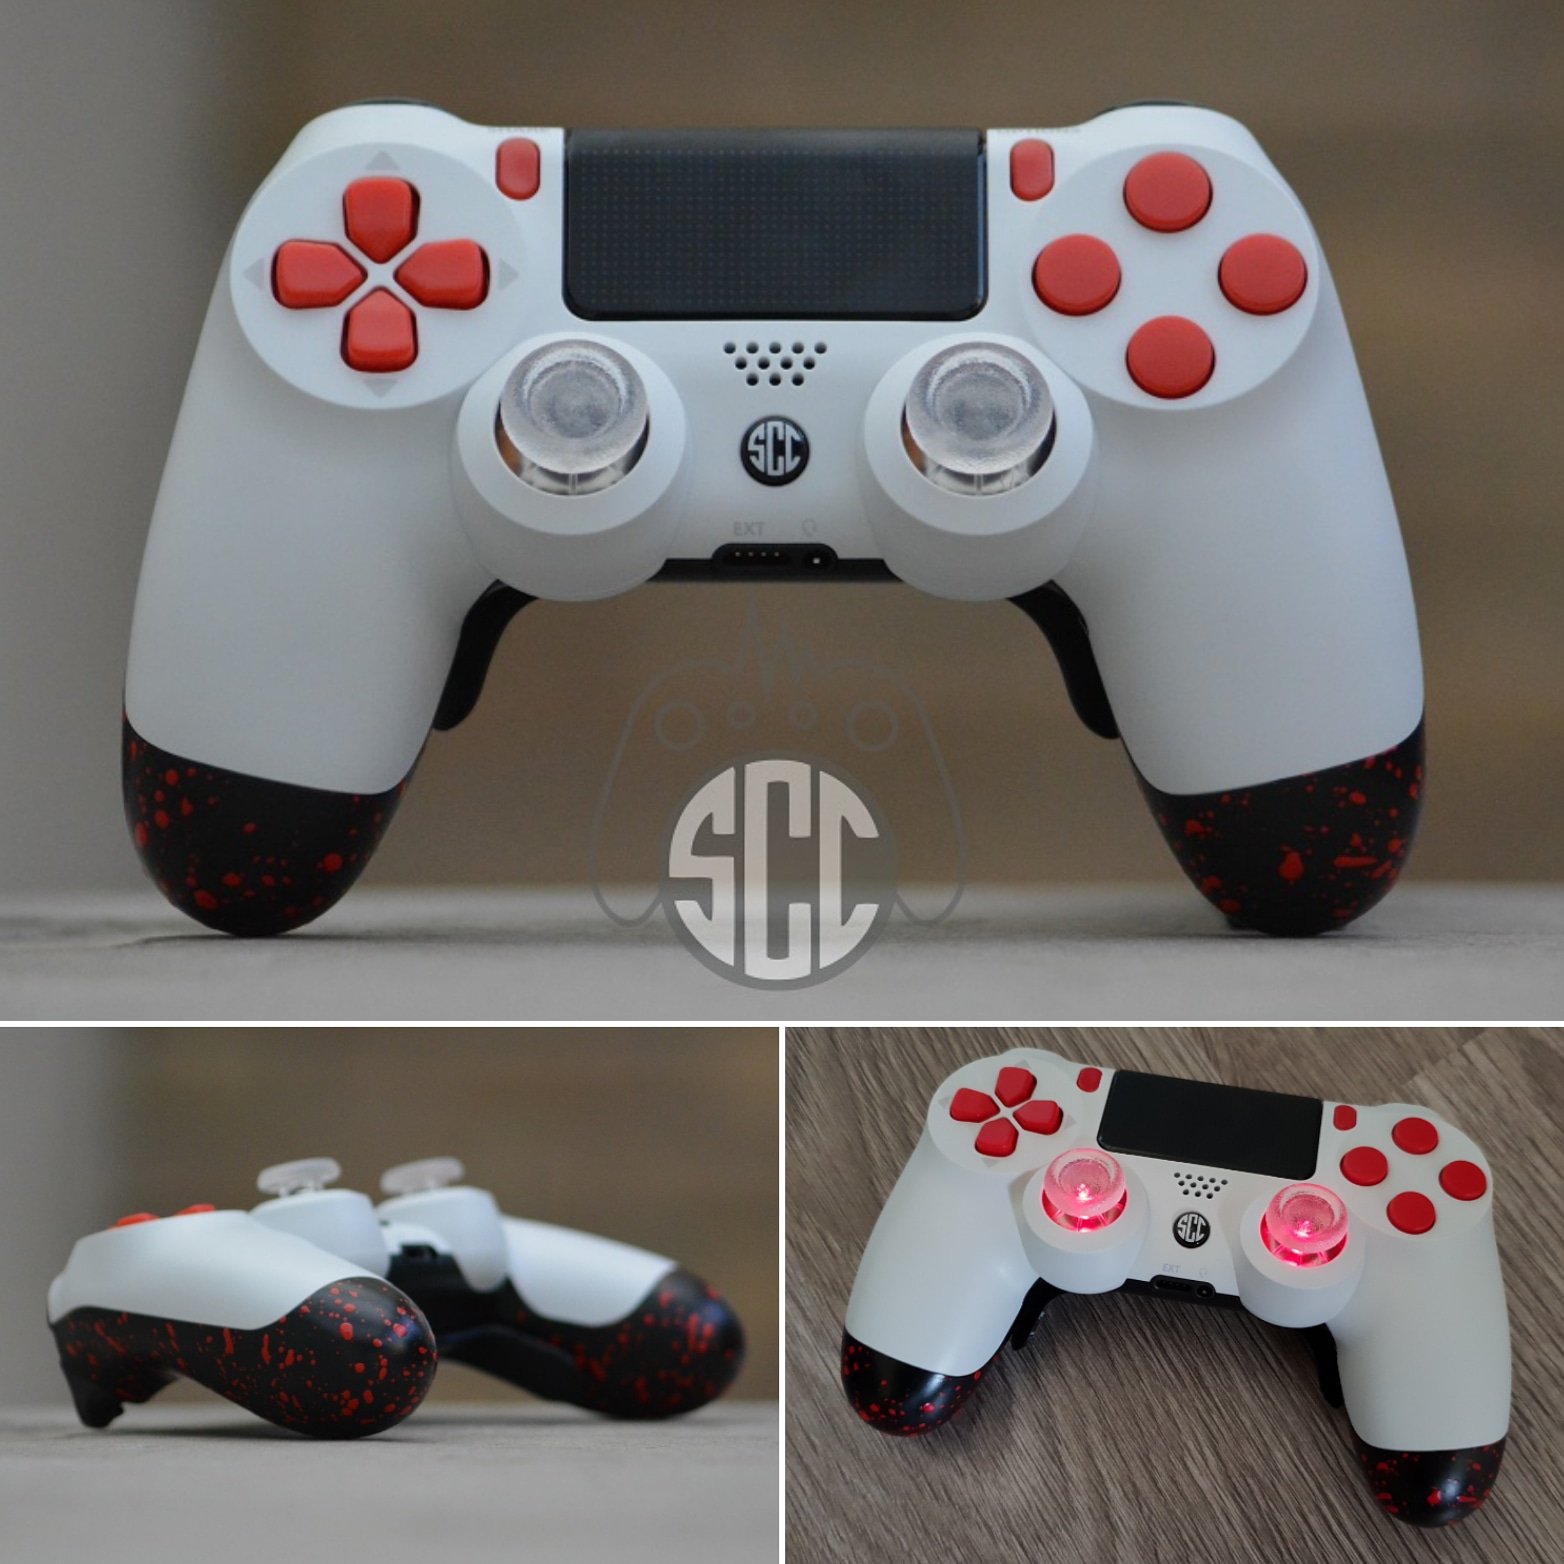 Shockwaveknives Witte Ps4 Controller Met Grip Rode Knoppen Led Sticks Triggerstops En Shock Paddles White Ps4controller With Grip Red Buttons Led Sticks Triggerstops And Shock Paddles T Co Kuwr9tmtwx Twitter